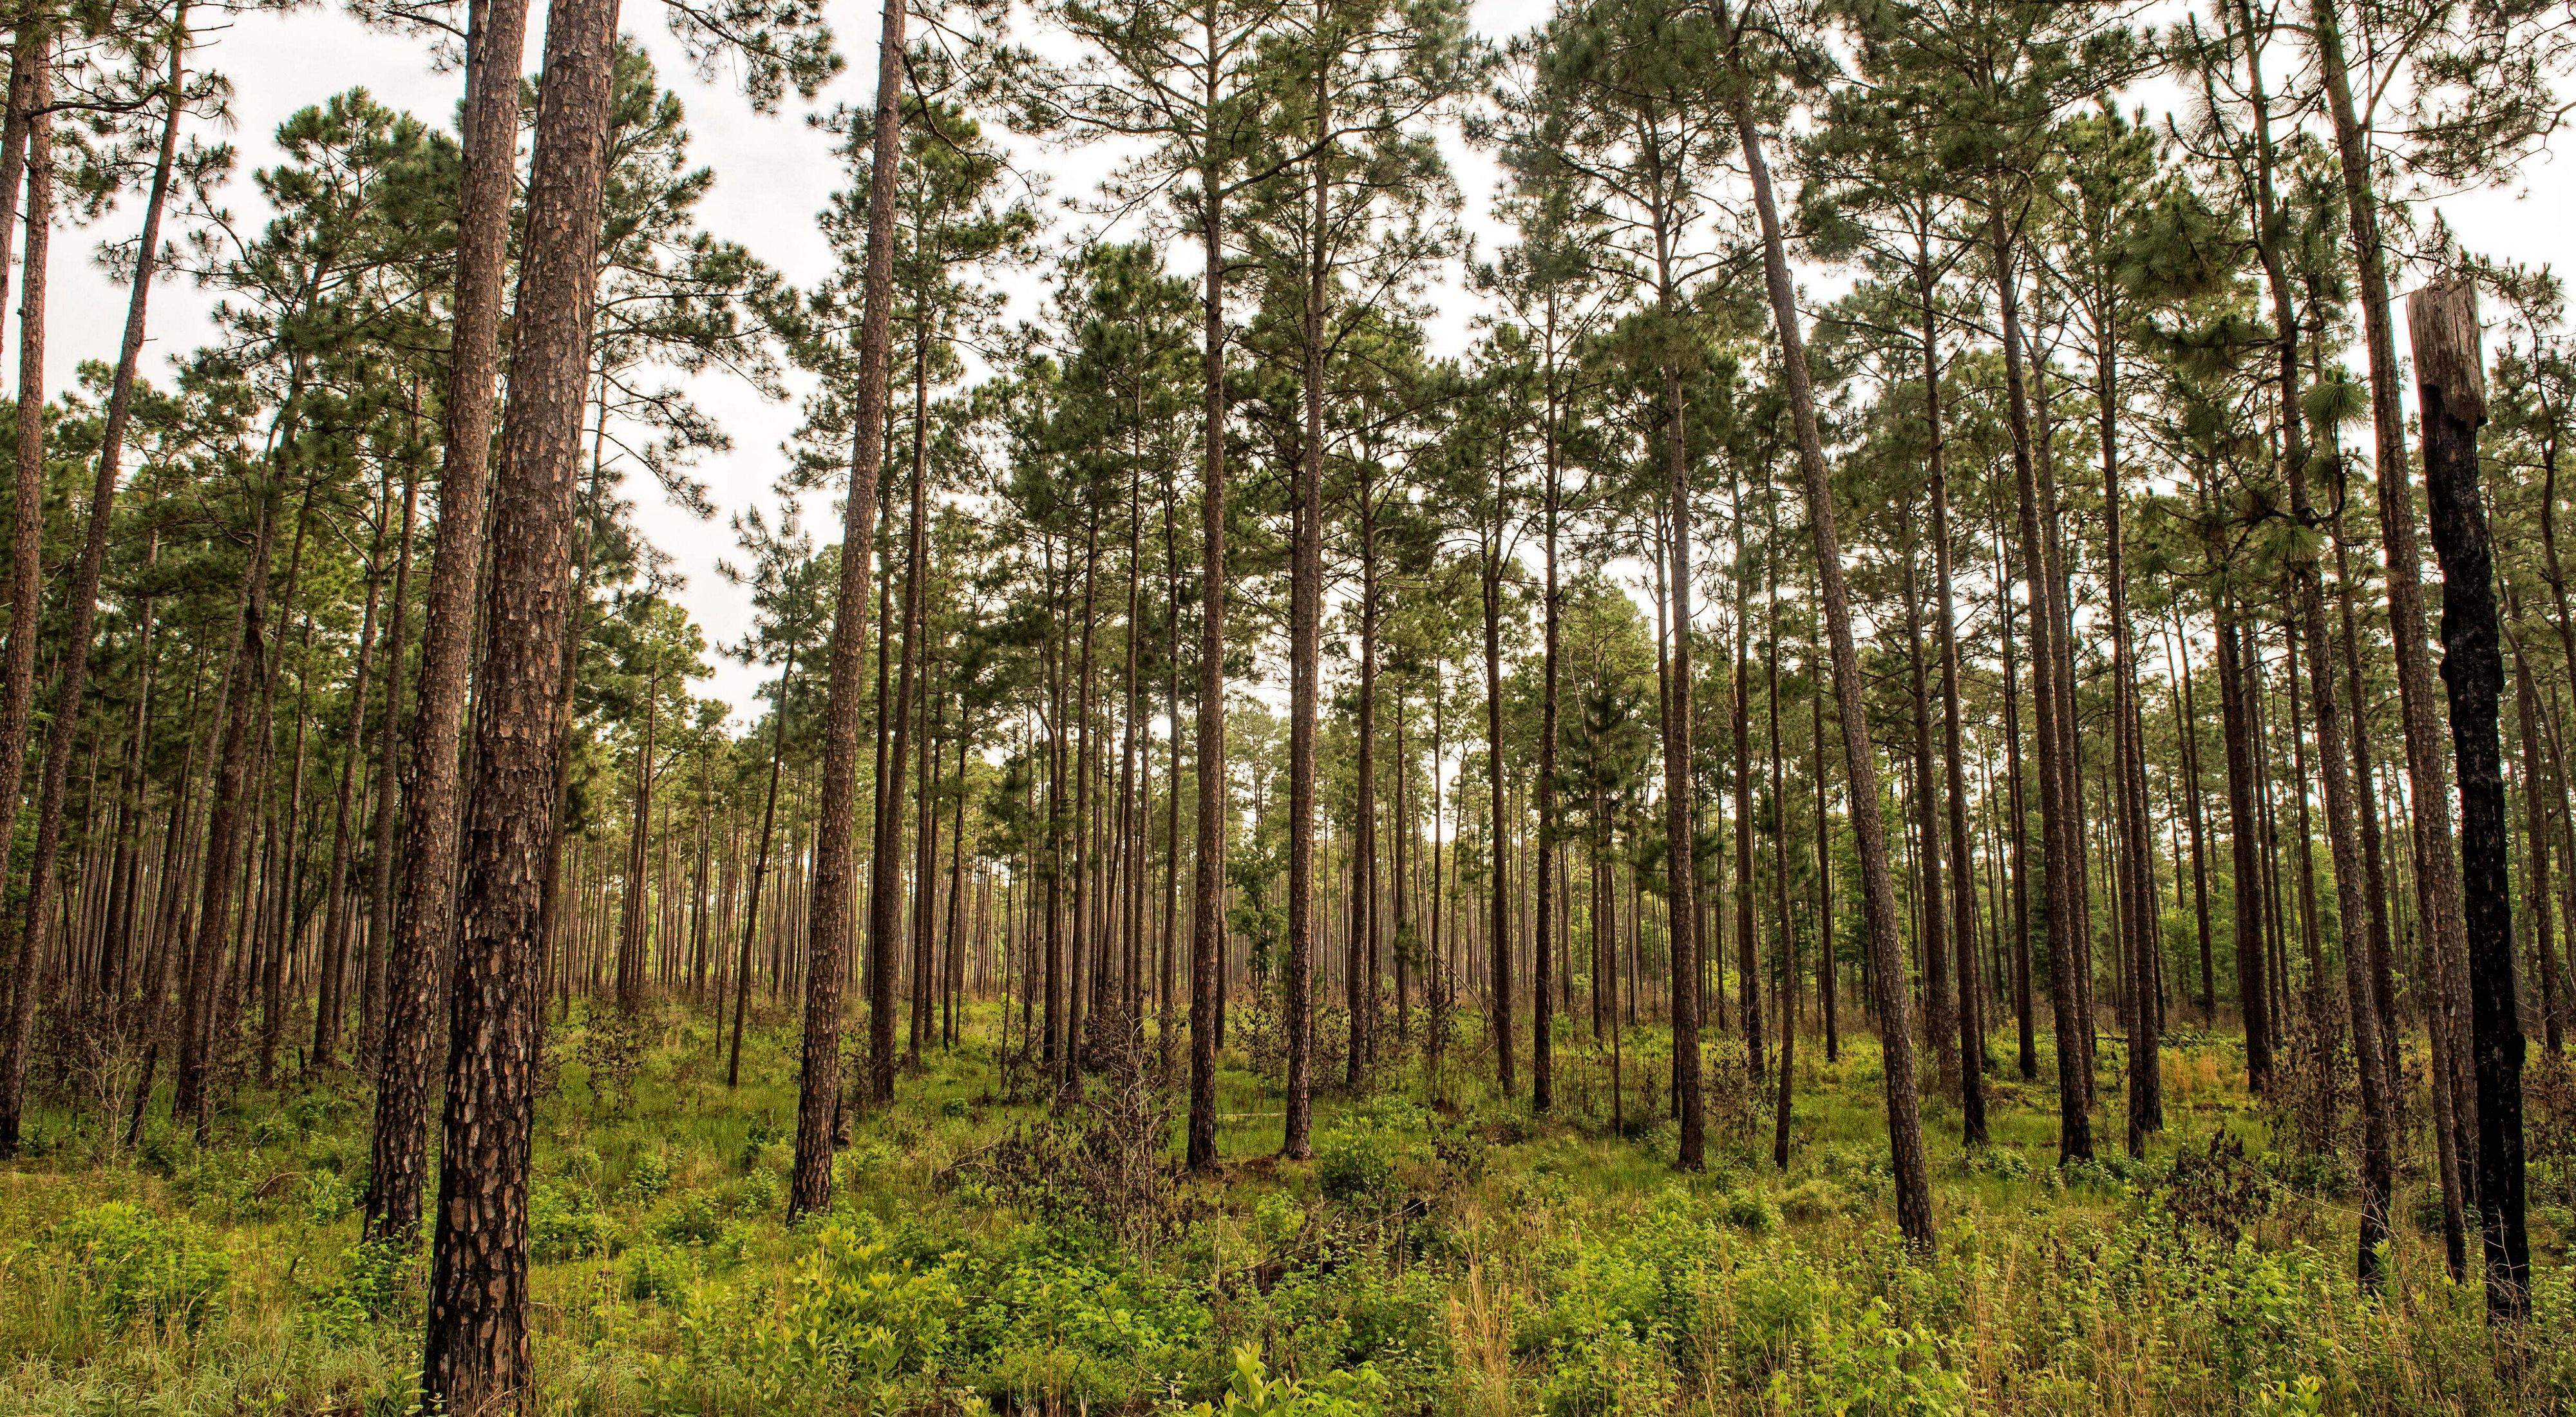 A stand of longleaf pine trees.